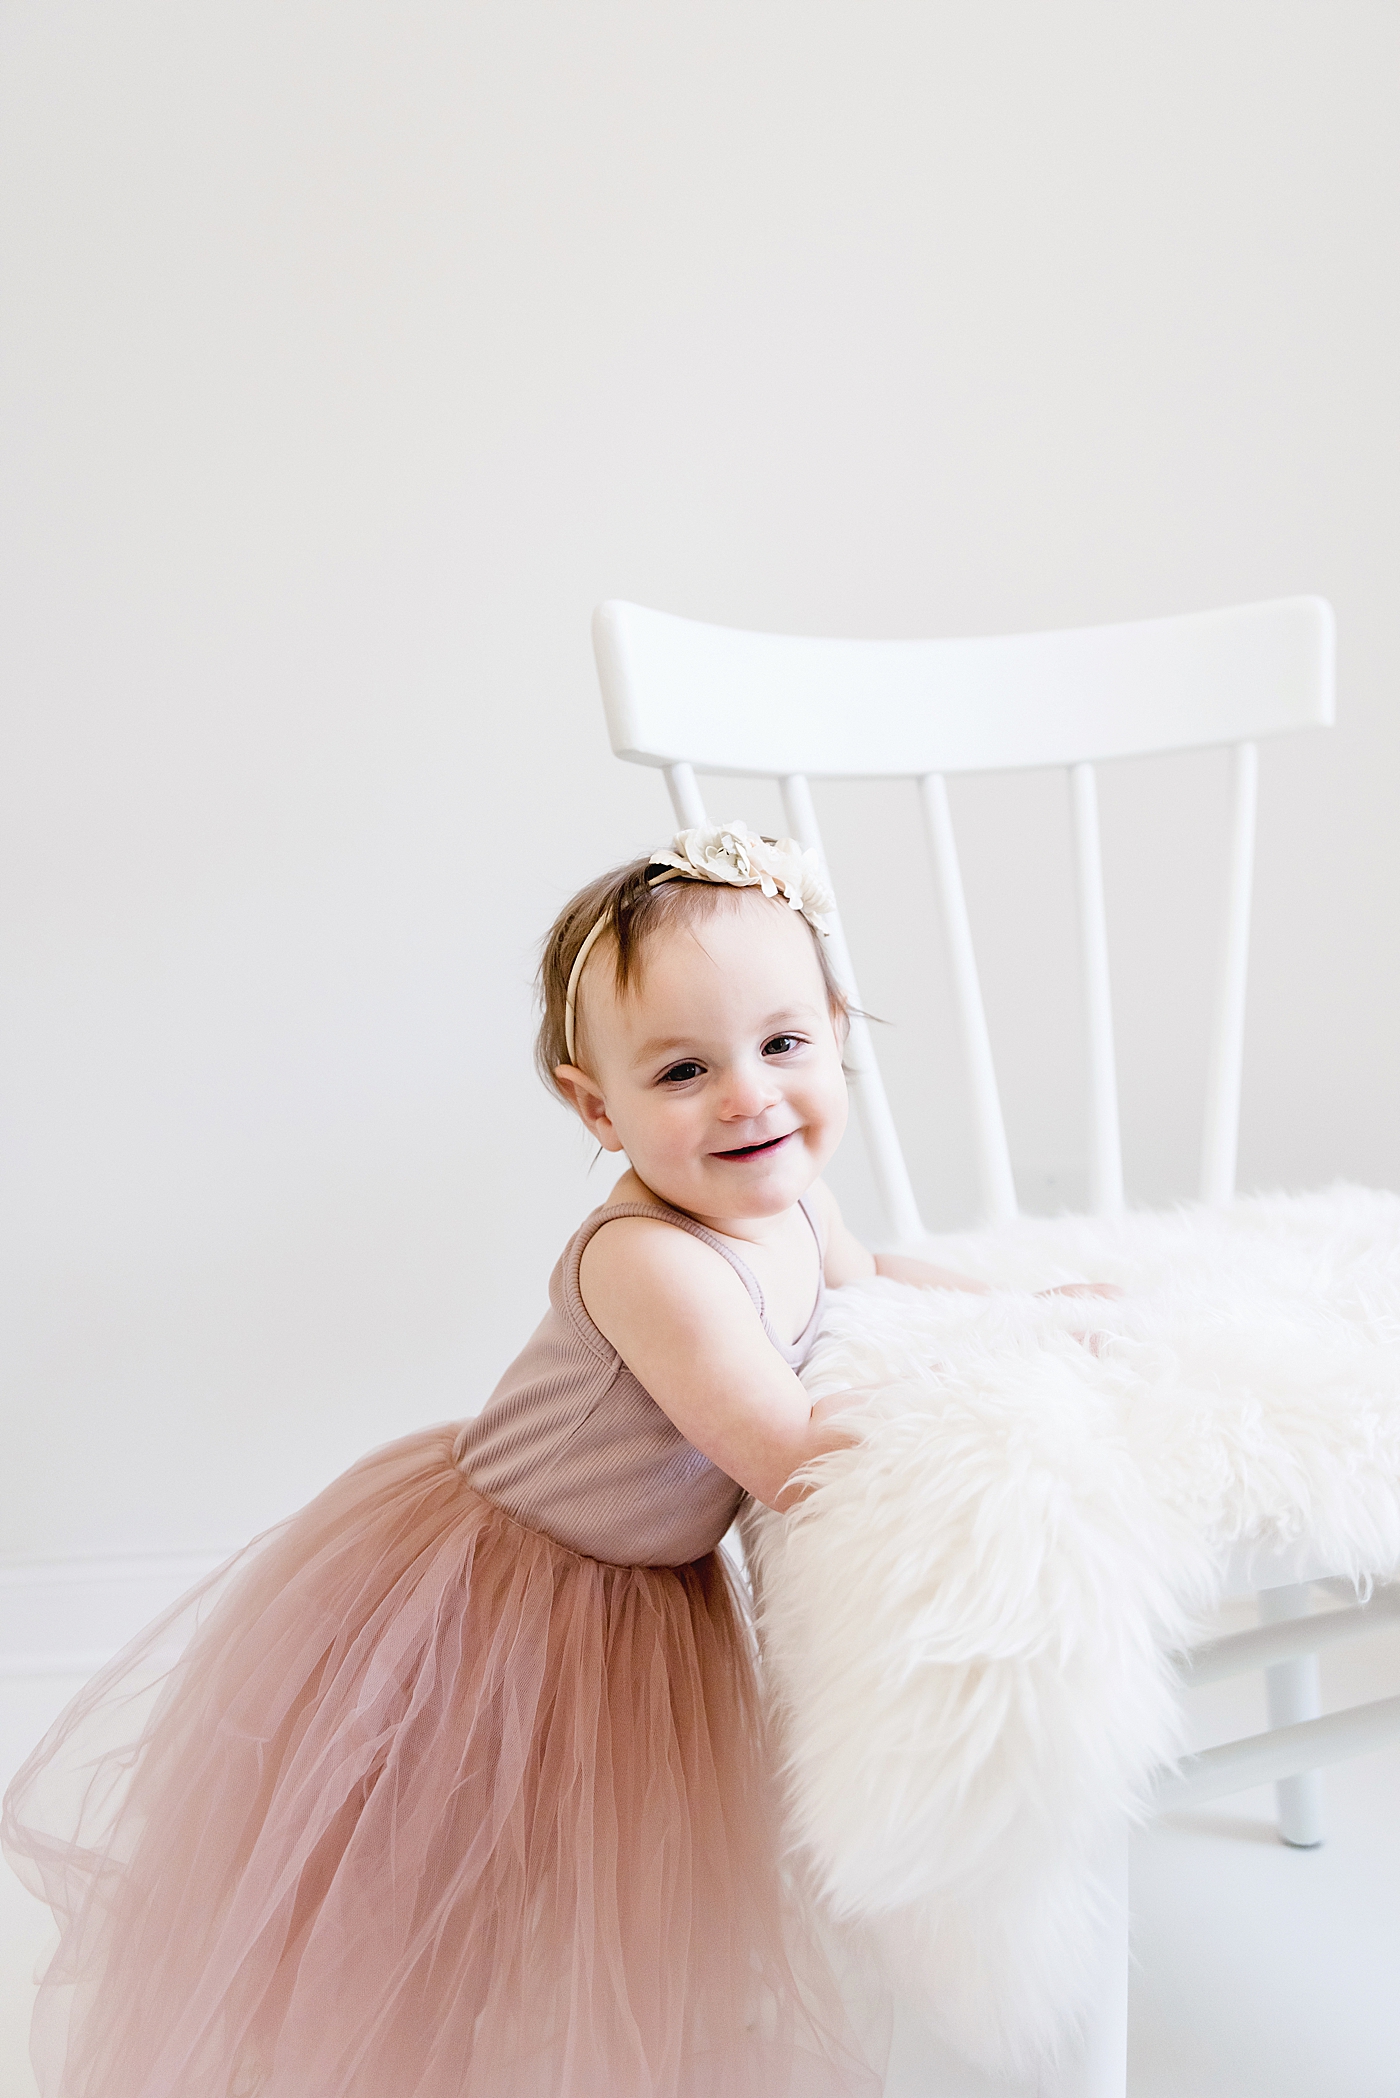 Toddler girl in pink tutu standing beside white chair | Photo by Huntersville Baby Photographer Anna Wisjo 